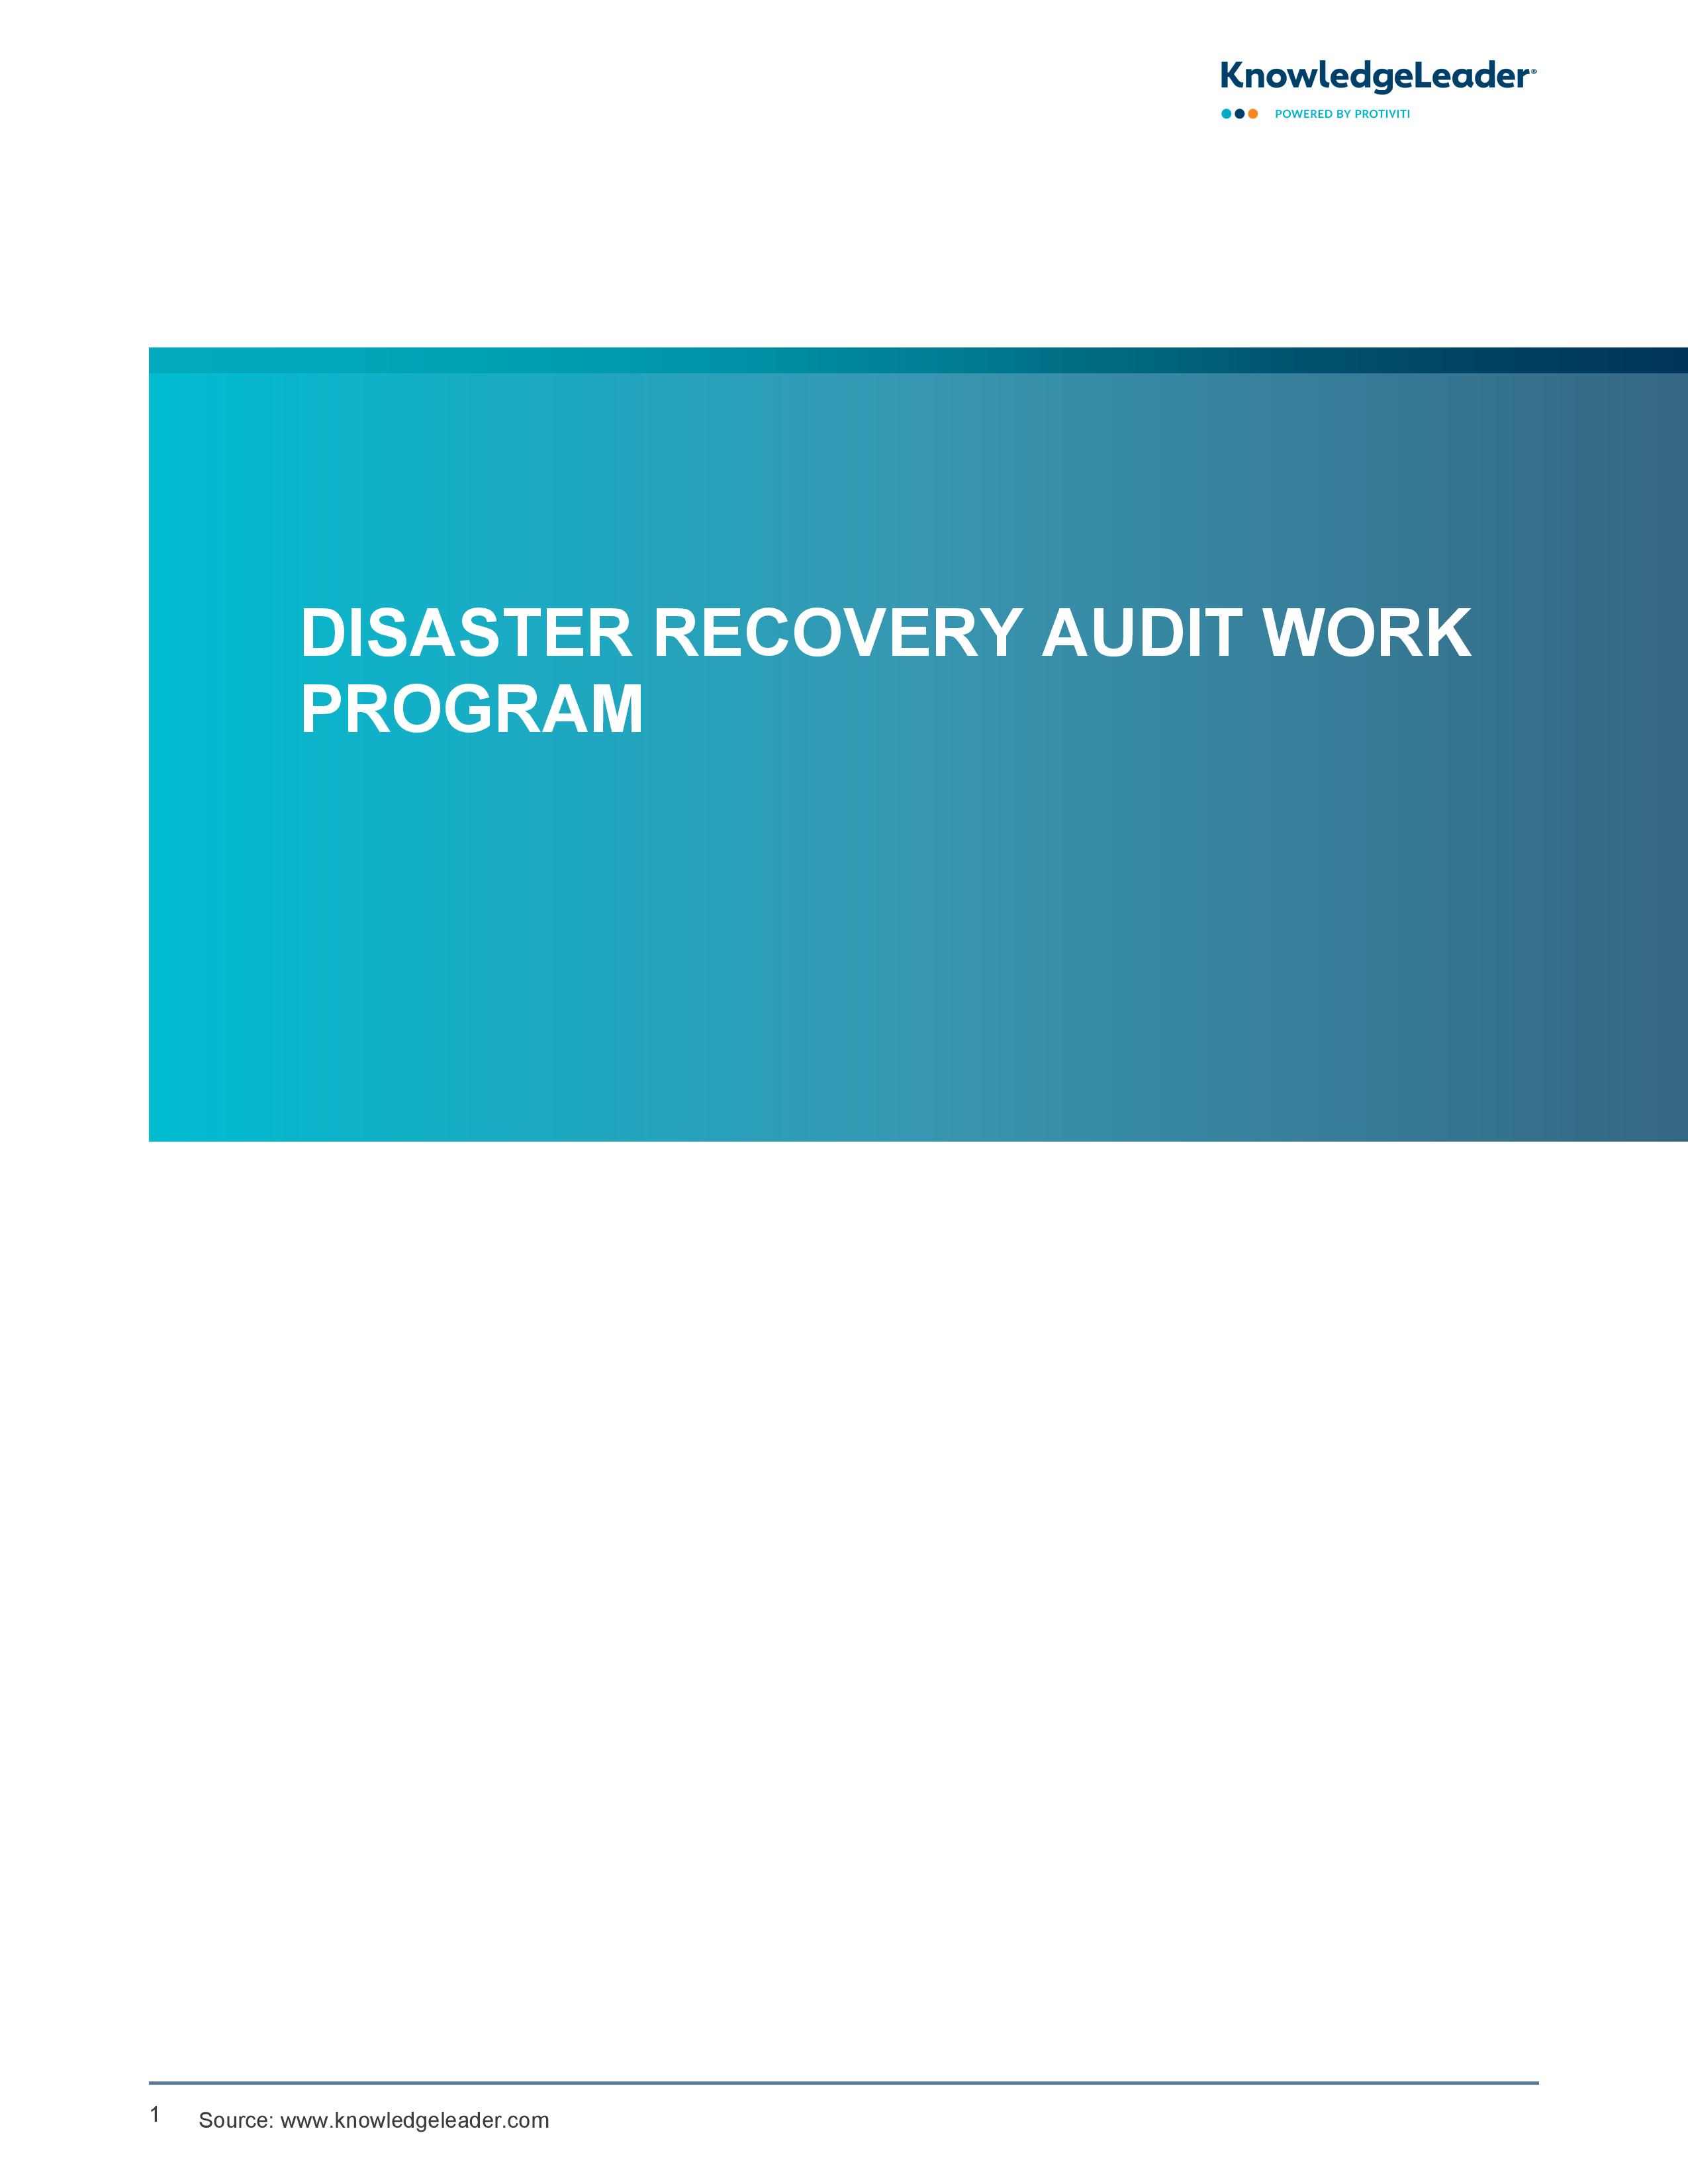 screenshot of the first page of Disaster Recovery Audit Work Program